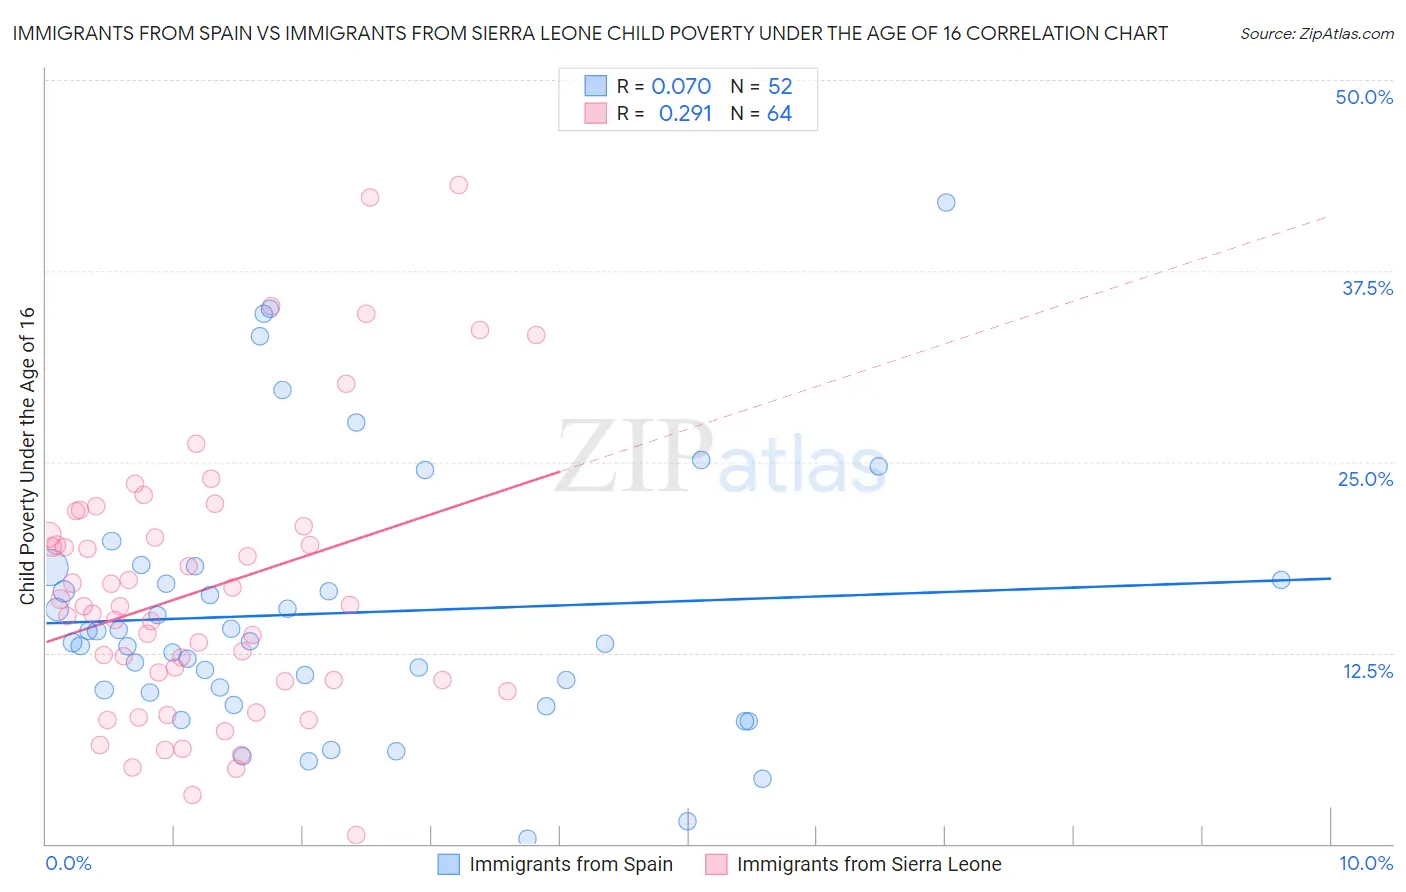 Immigrants from Spain vs Immigrants from Sierra Leone Child Poverty Under the Age of 16